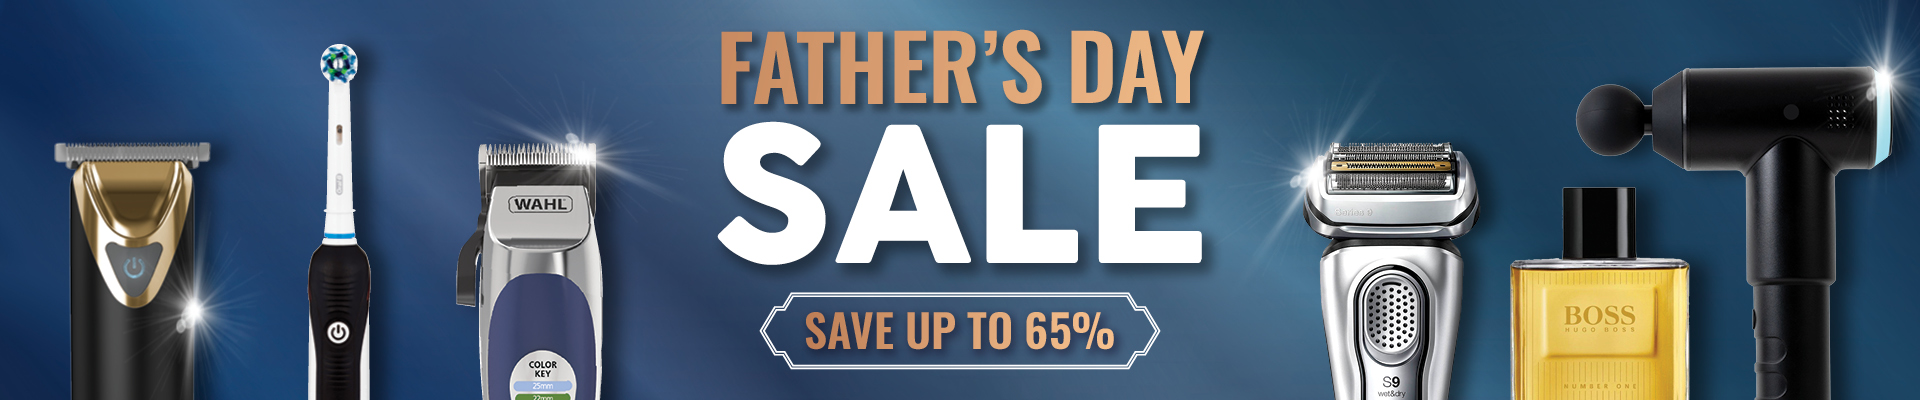 Father's Day sale - Up to 65% OFF at Shaver shop